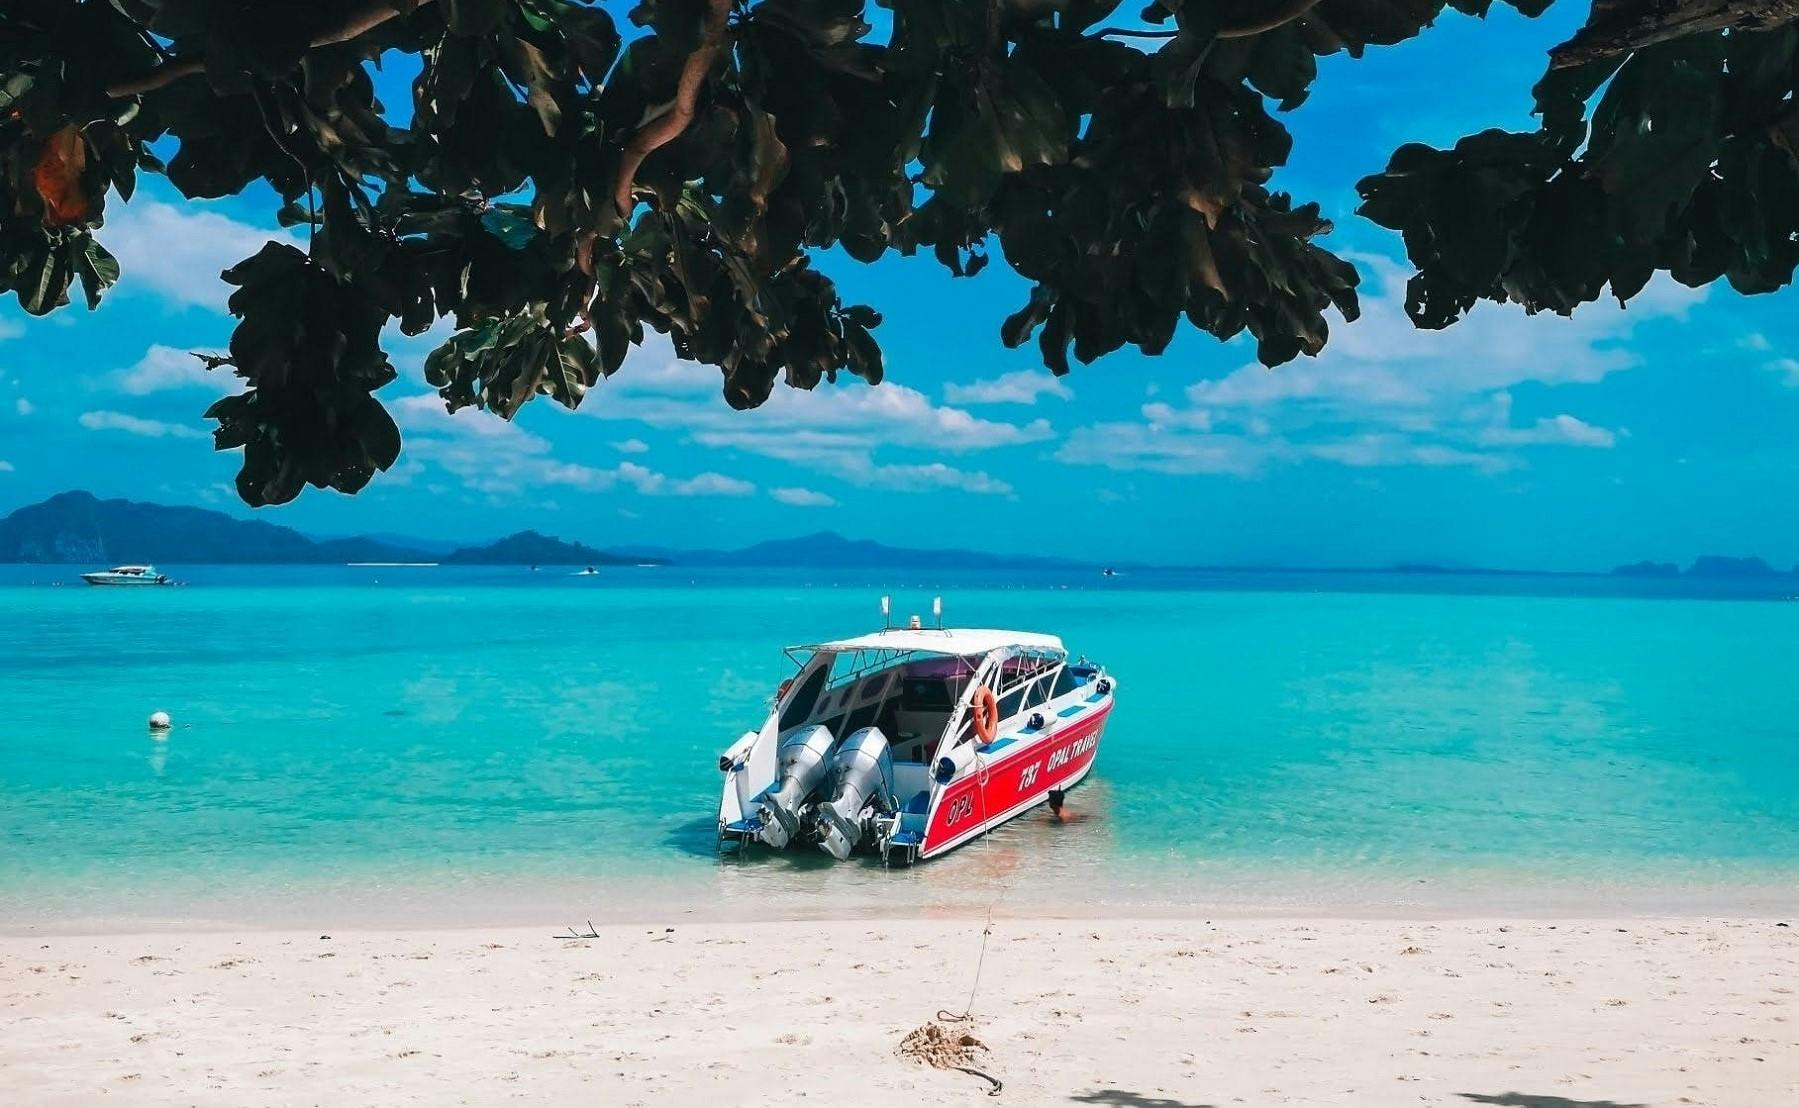 Phi Phi Islands snorkel tour by speed boat from Koh Lanta